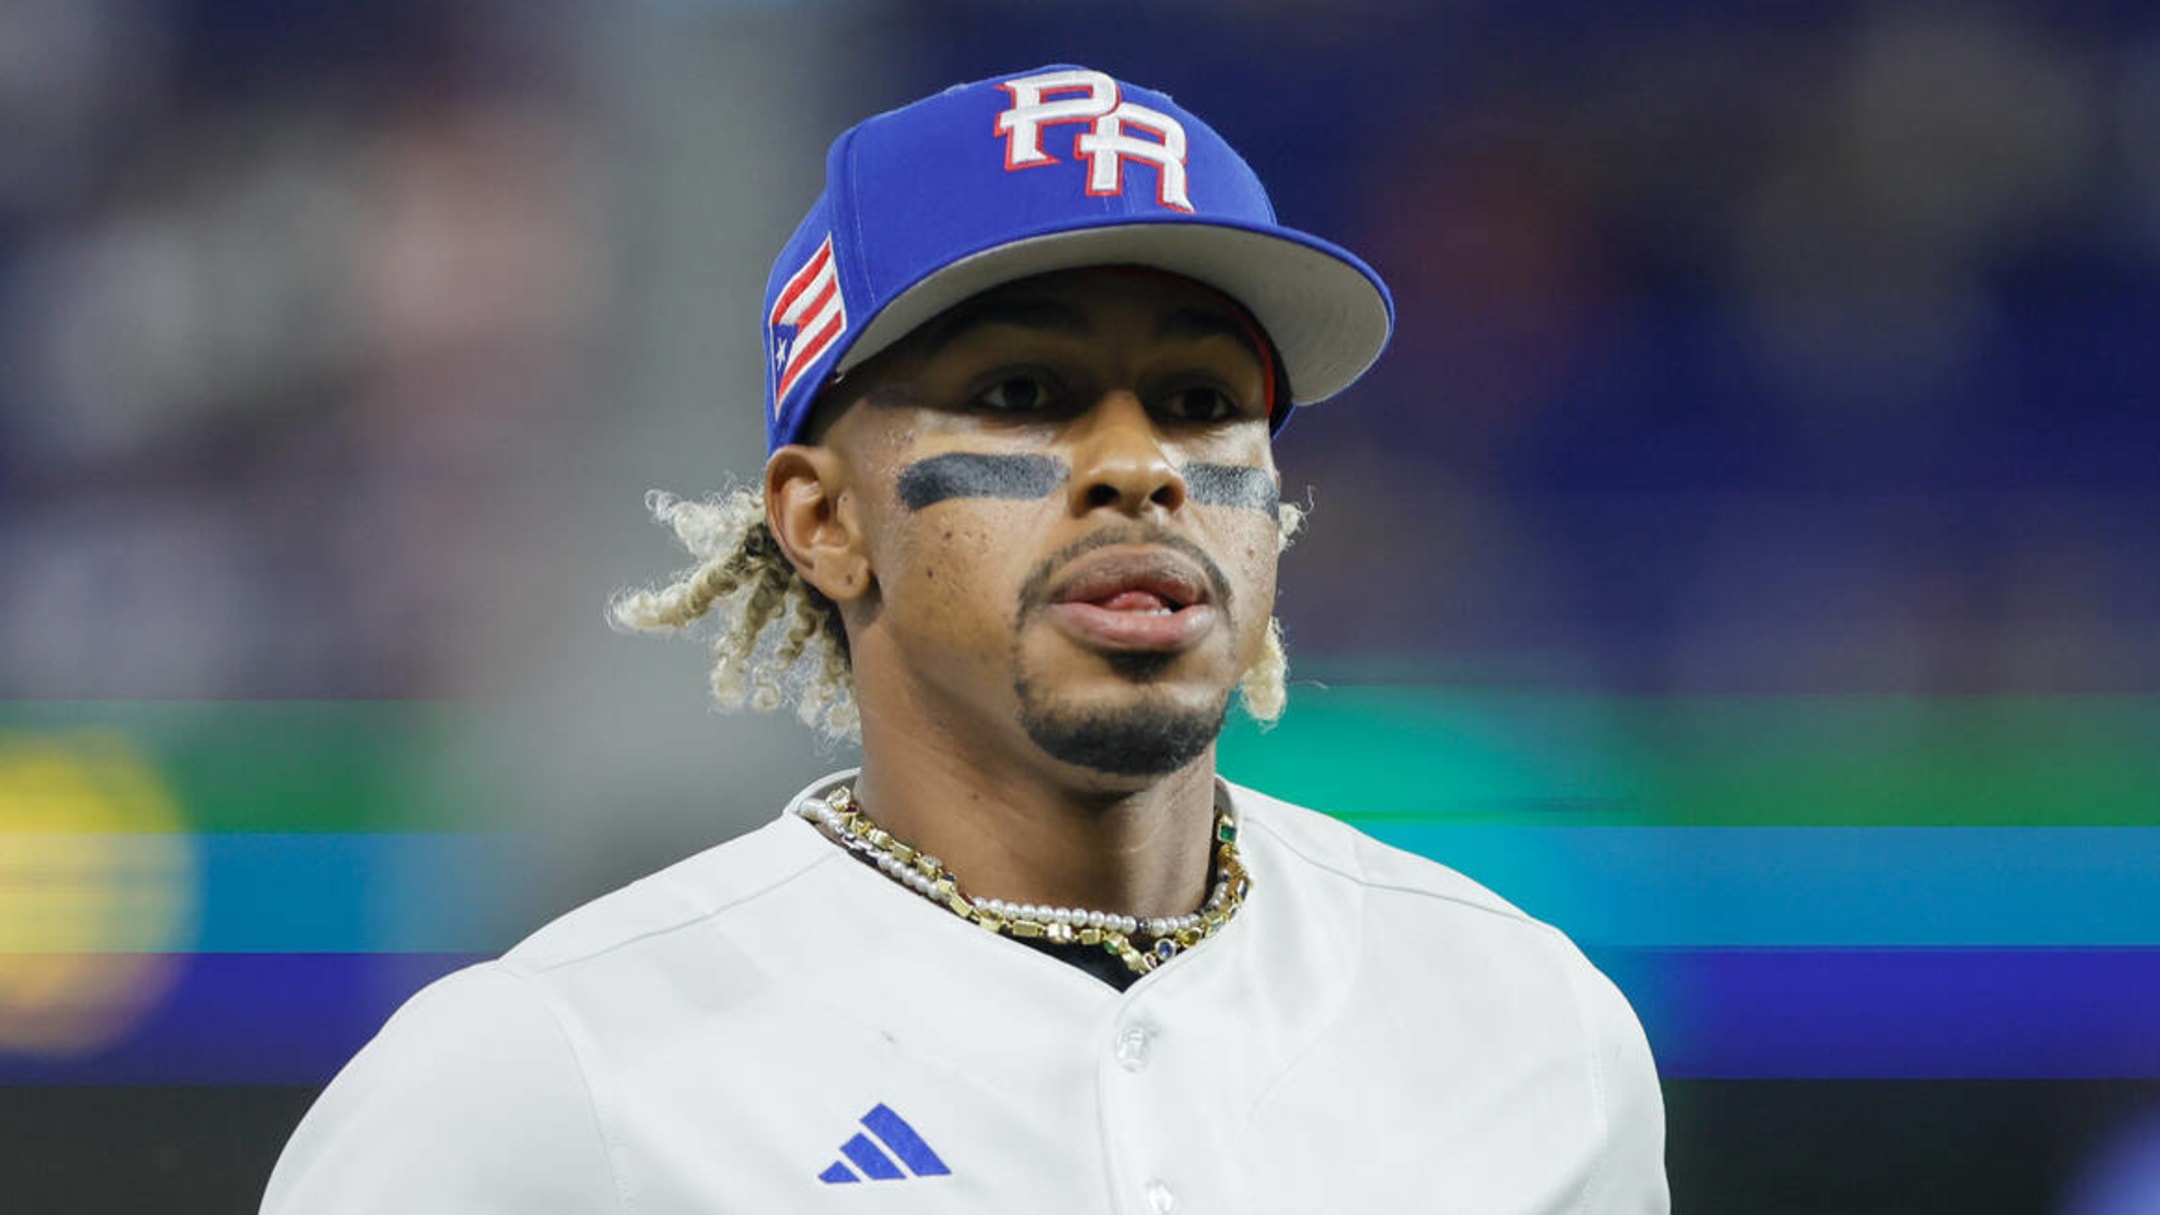 Francisco Lindor in Mets colors is going to take some getting used to